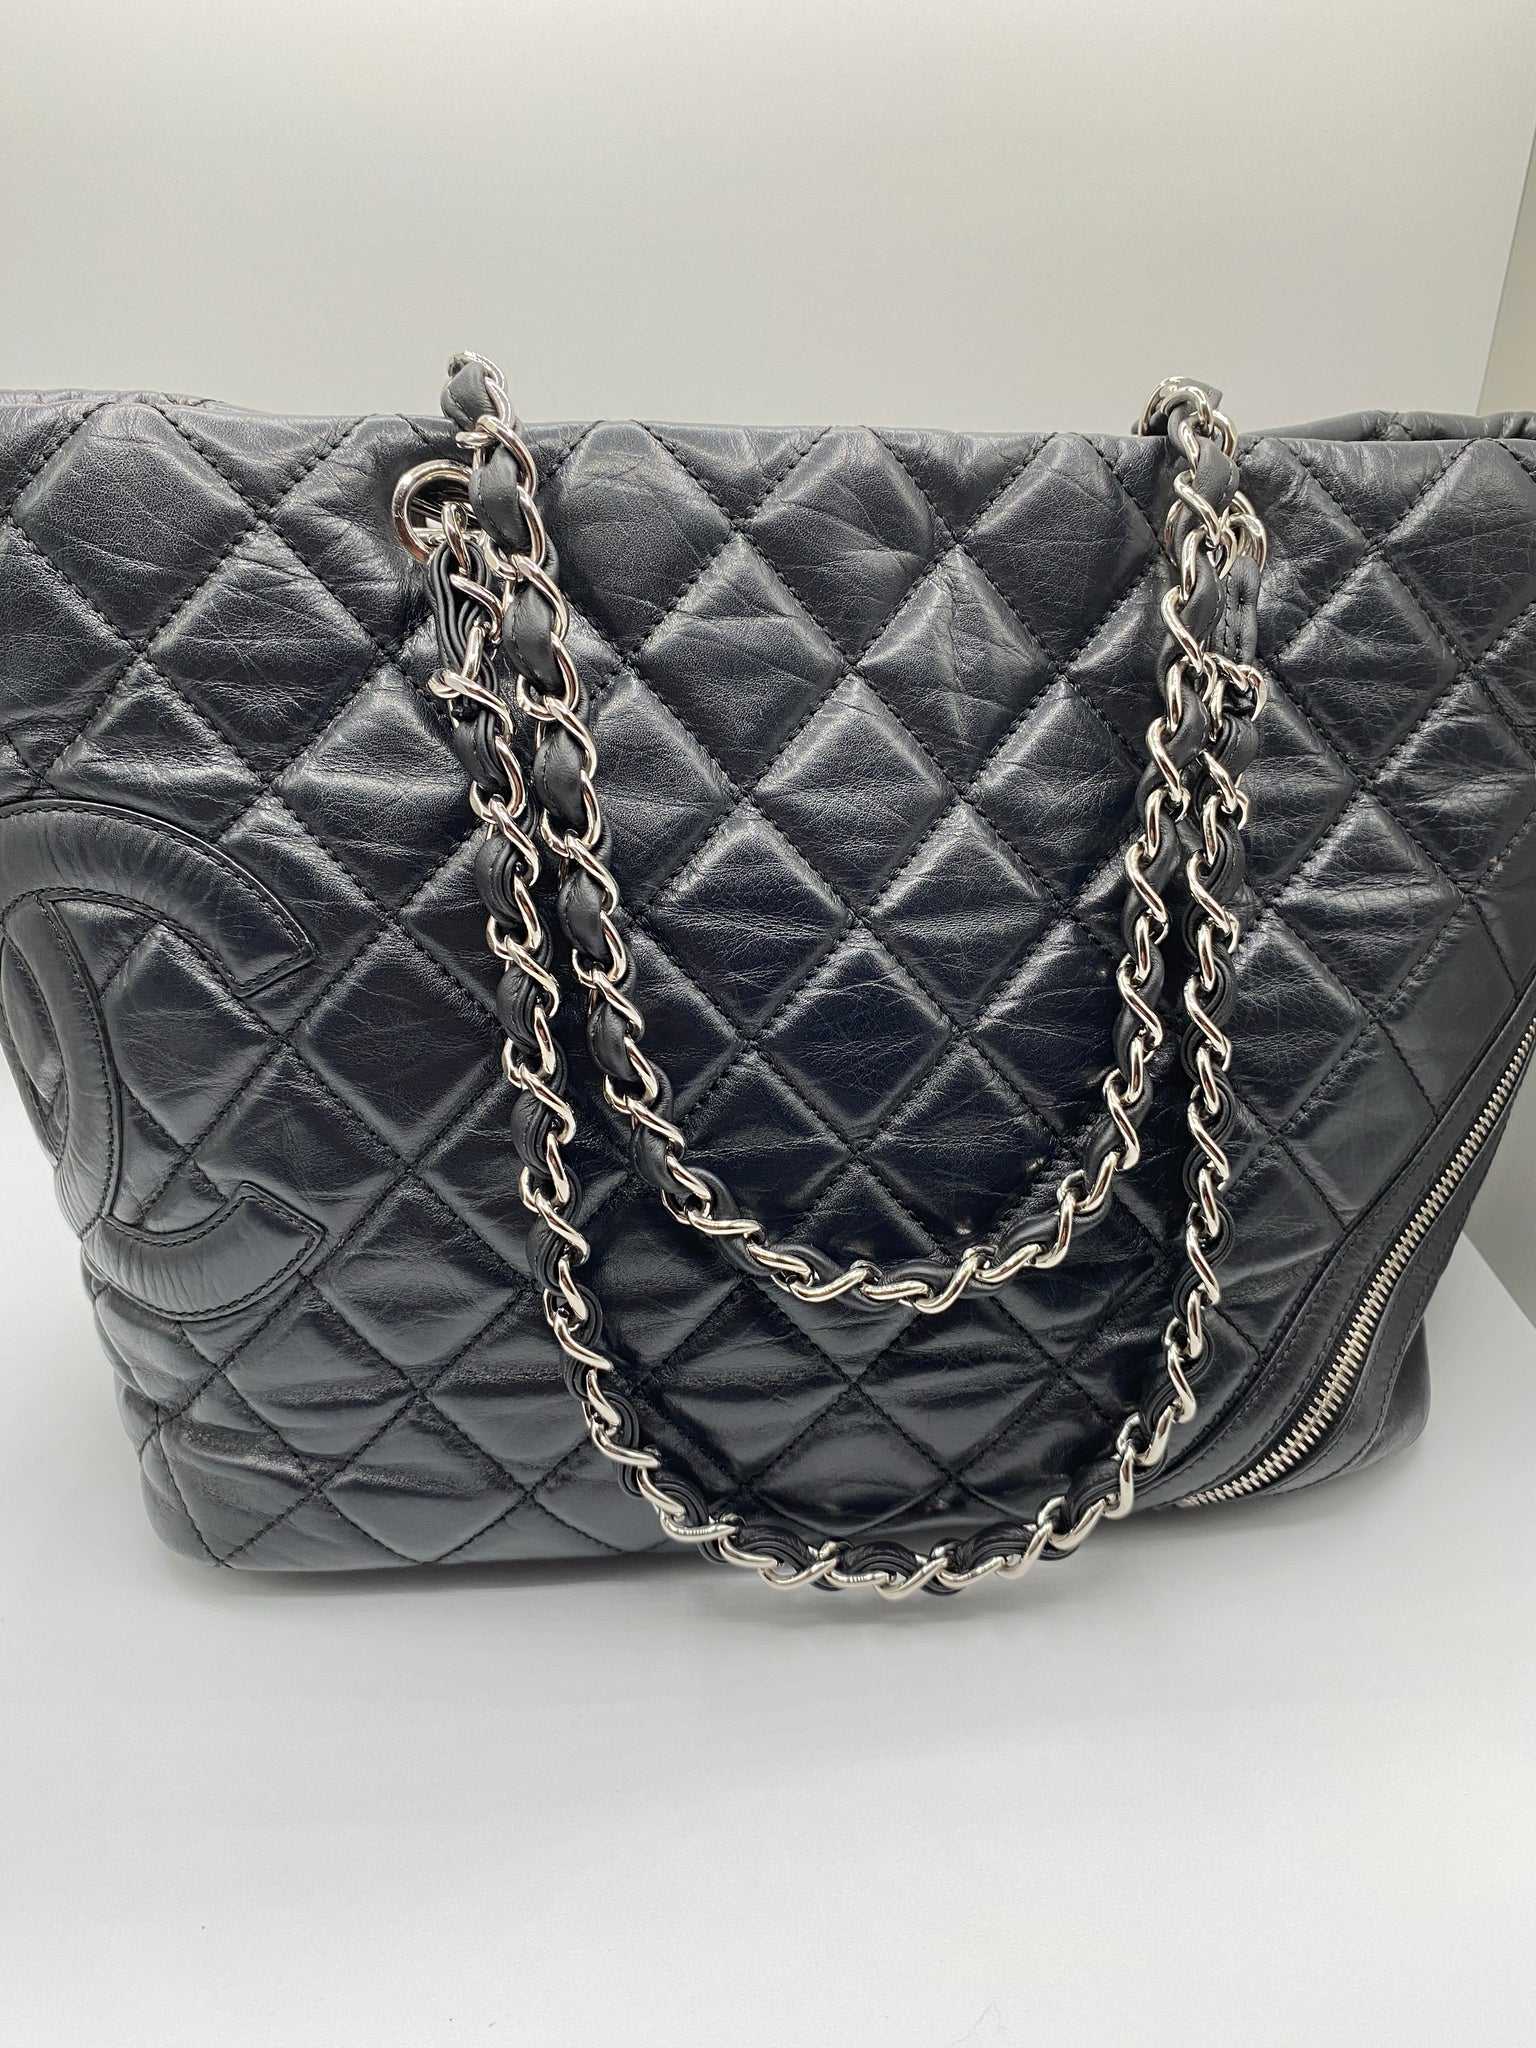 Coco Chanel Vintage Bags - 15 For Sale on 1stDibs